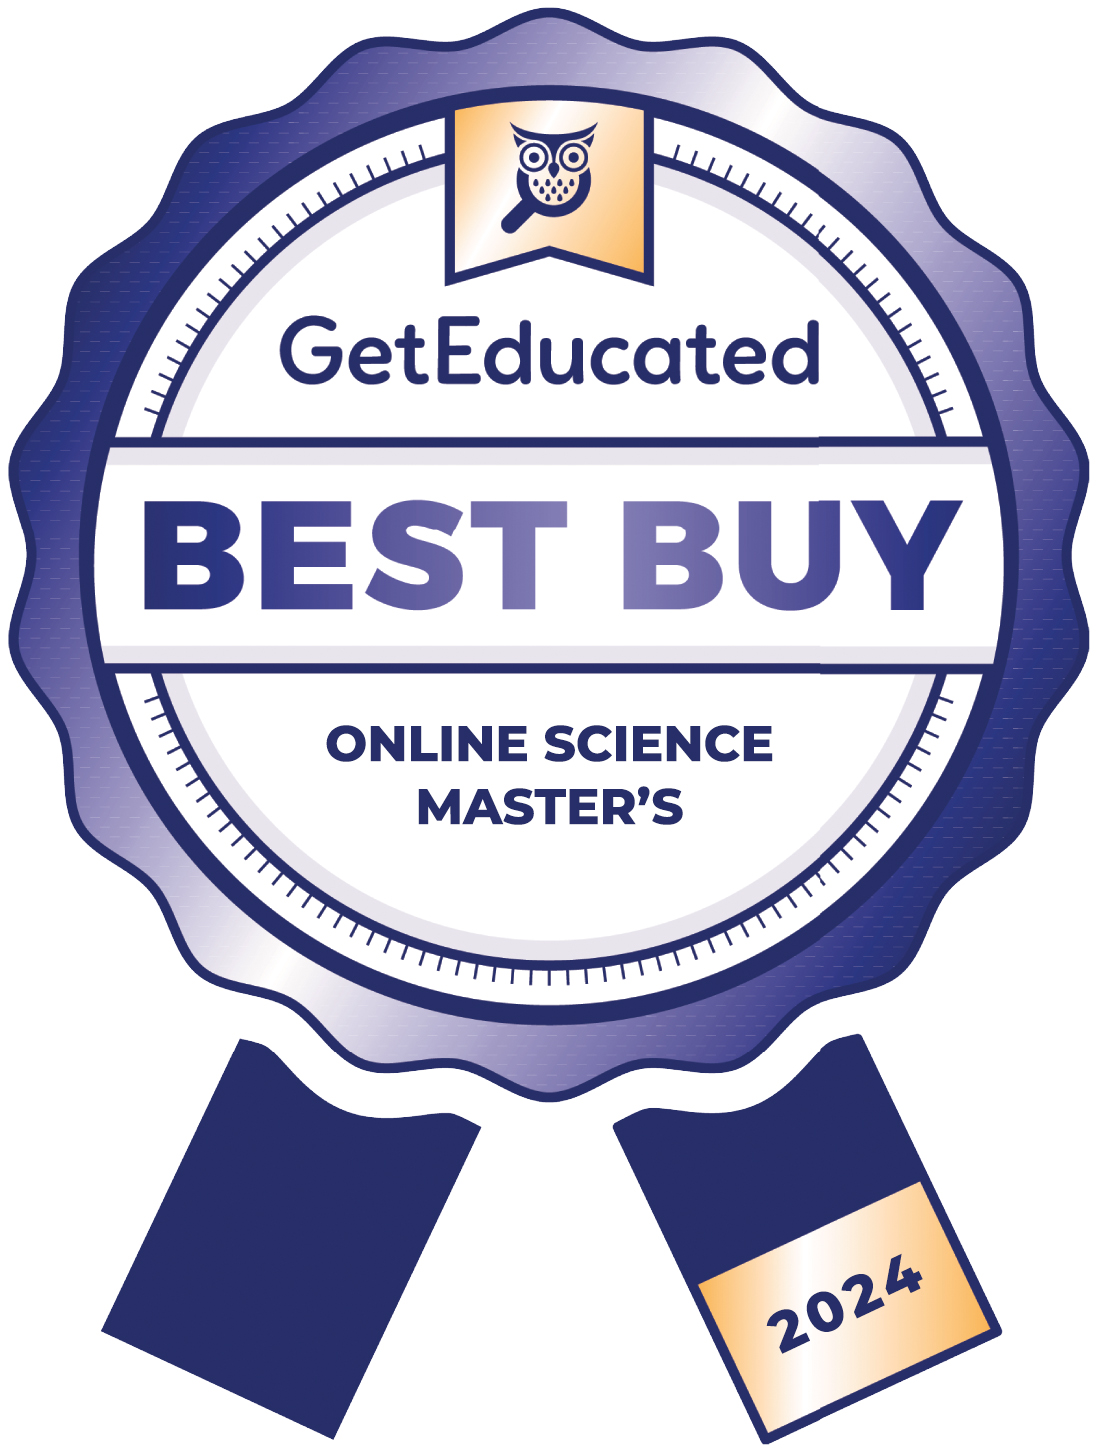 Rankings of the cheapest online science master's